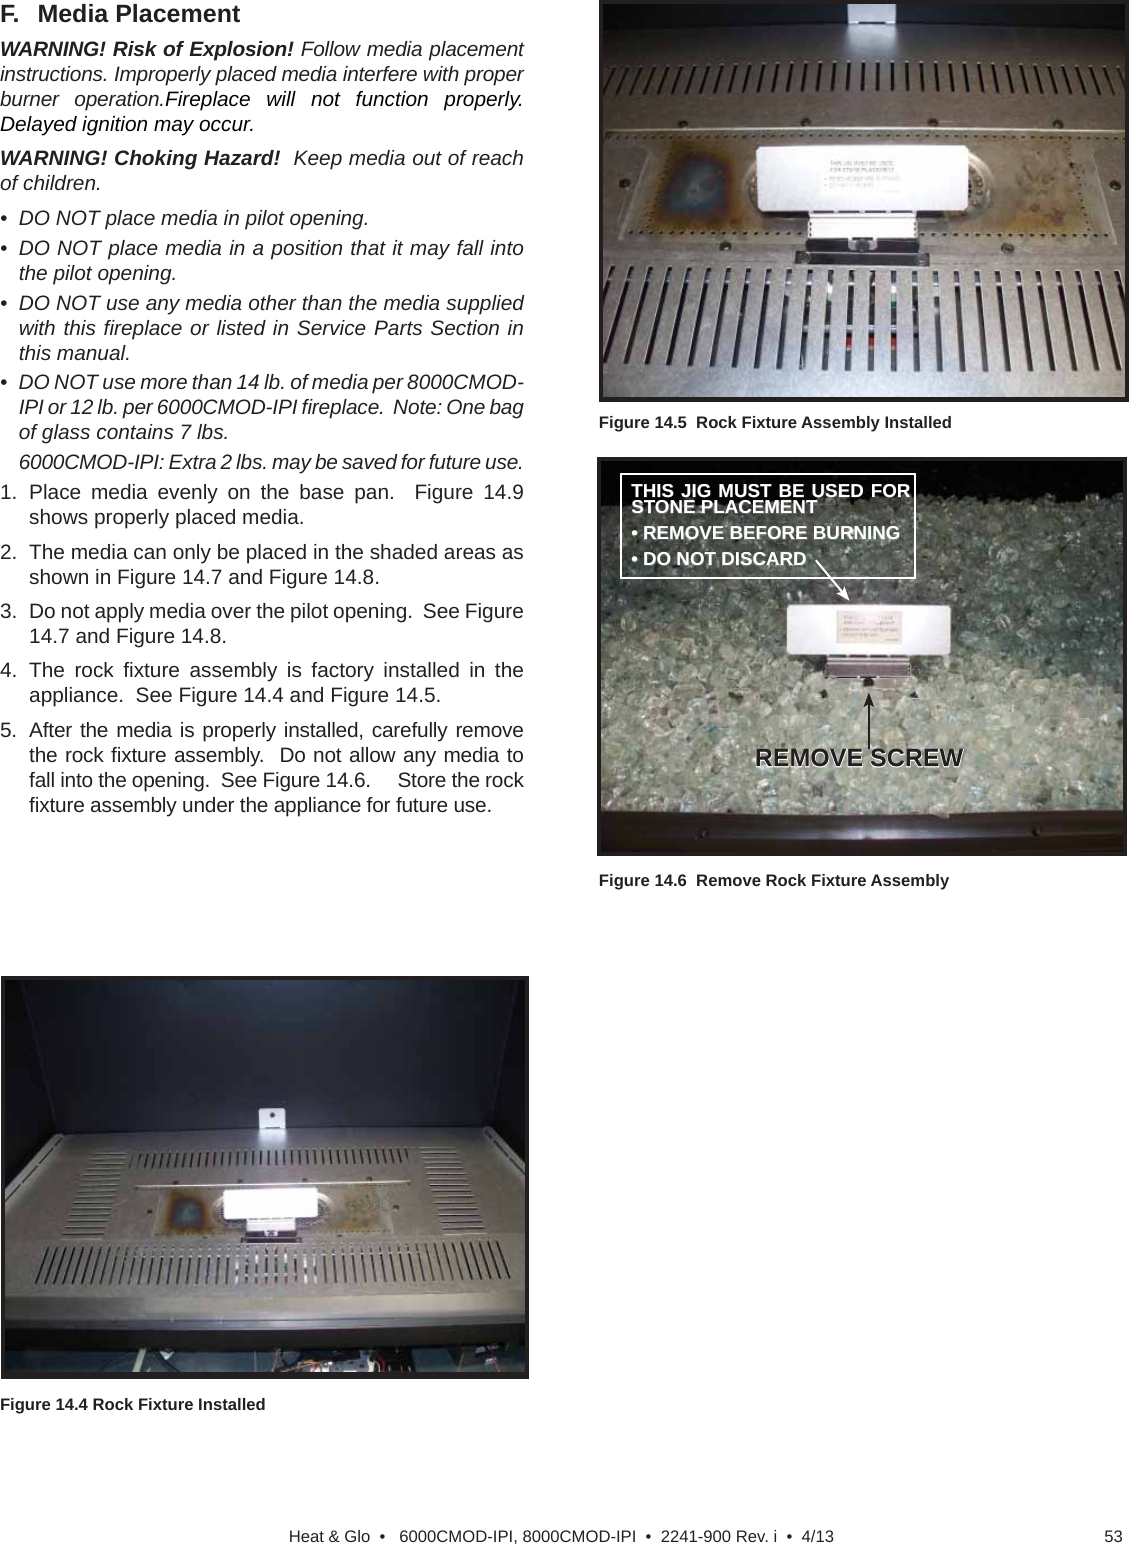 53Heat &amp; Glo  •   6000CMOD-IPI, 8000CMOD-IPI  •  2241-900 Rev. i  •  4/13F.   Media PlacementWARNING! Risk of Explosion! Follow media placement instructions. Improperly placed media interfere with proper burner operation.Fireplace will not function properly. Delayed ignition may occur.WARNING! Choking Hazard!  Keep media out of reach of children.•  DO NOT place media in pilot opening.•  DO NOT place media in a position that it may fall into the pilot opening.•  DO NOT use any media other than the media supplied with this ﬁ replace or listed in Service Parts Section in this manual.•  DO NOT use more than 14 lb. of media per 8000CMOD-IPI or 12 lb. per 6000CMOD-IPI ﬁ replace.  Note: One bag of glass contains 7 lbs.   6000CMOD-IPI: Extra 2 lbs. may be saved for future use.1.  Place media evenly on the base pan.  Figure 14.9 shows properly placed media.  2.  The media can only be placed in the shaded areas as shown in Figure 14.7 and Figure 14.8.3.  Do not apply media over the pilot opening.  See Figure 14.7 and Figure 14.8.4. The rock ﬁ xture assembly is factory installed in the appliance.  See Figure 14.4 and Figure 14.5.5.  After the media is properly installed, carefully remove the rock ﬁ xture assembly.  Do not allow any media to fall into the opening.  See Figure 14.6.     Store the rock ﬁ xture assembly under the appliance for future use.Figure 14.4 Rock Fixture InstalledFigure 14.5  Rock Fixture Assembly InstalledFigure 14.6  Remove Rock Fixture AssemblyREMOVE SCREWREMOVE SCREWTHIS JIG MUST BE USED FOR THIS JIG MUST BE USED FOR STONE PLACEMENTSTONE PLACEMENT• REMOVE BEFORE BURNING• REMOVE BEFORE BURNING• DO NOT DISCARD• DO NOT DISCARD